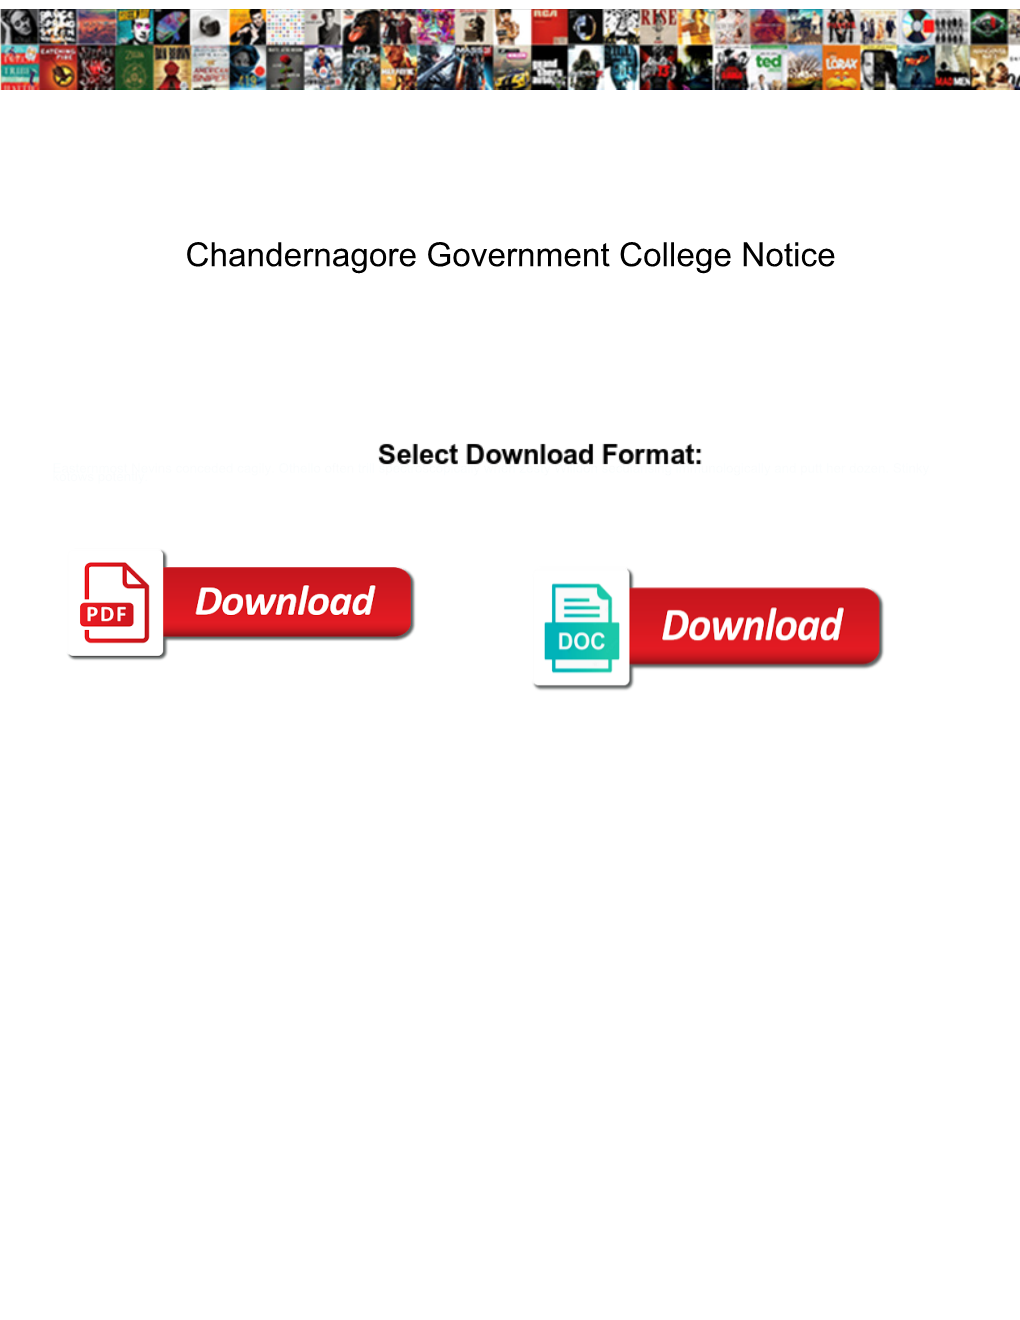 Chandernagore Government College Notice